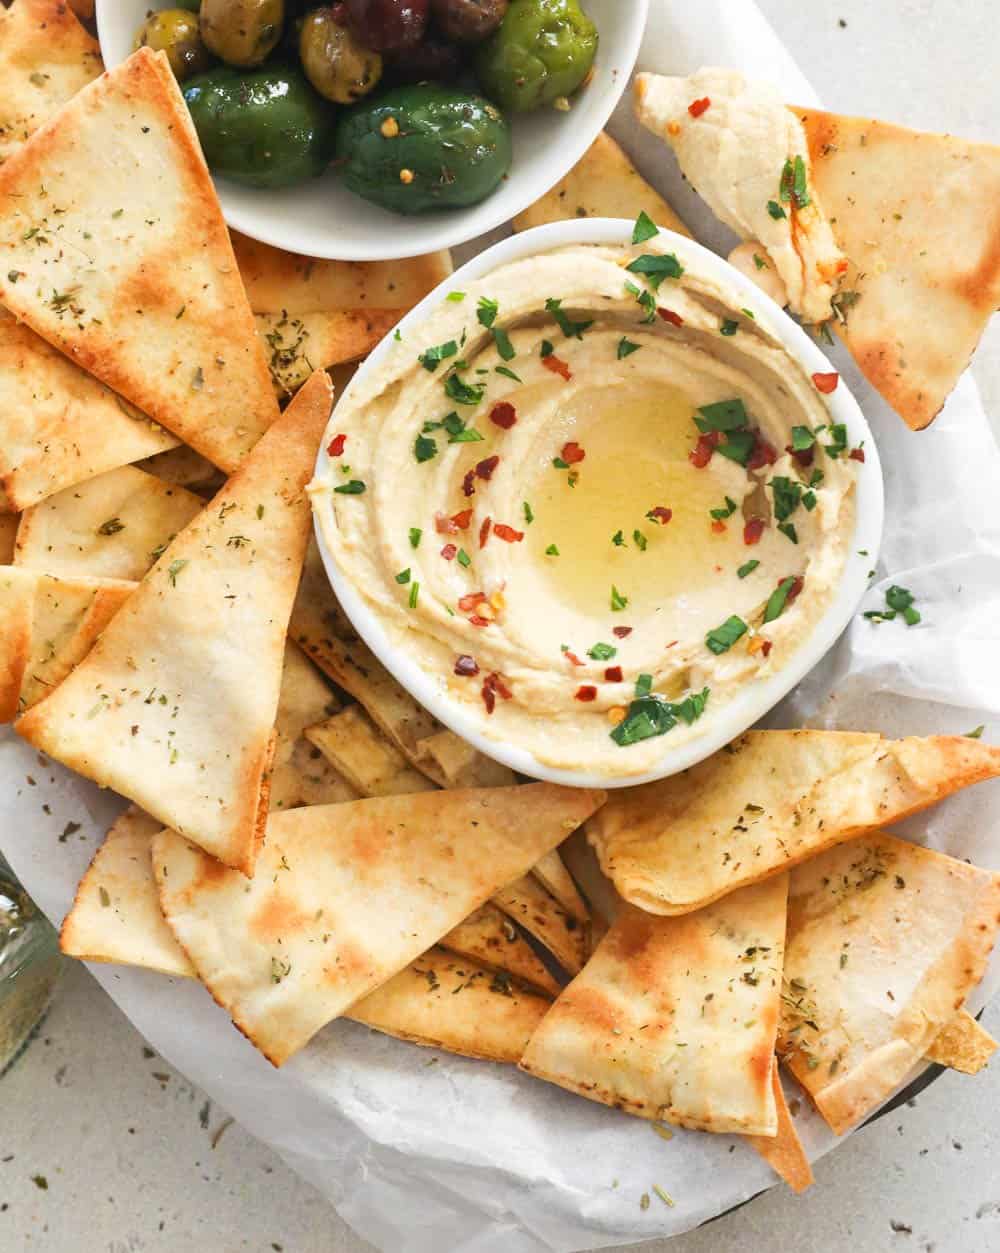 Pita chips with hummus and olives